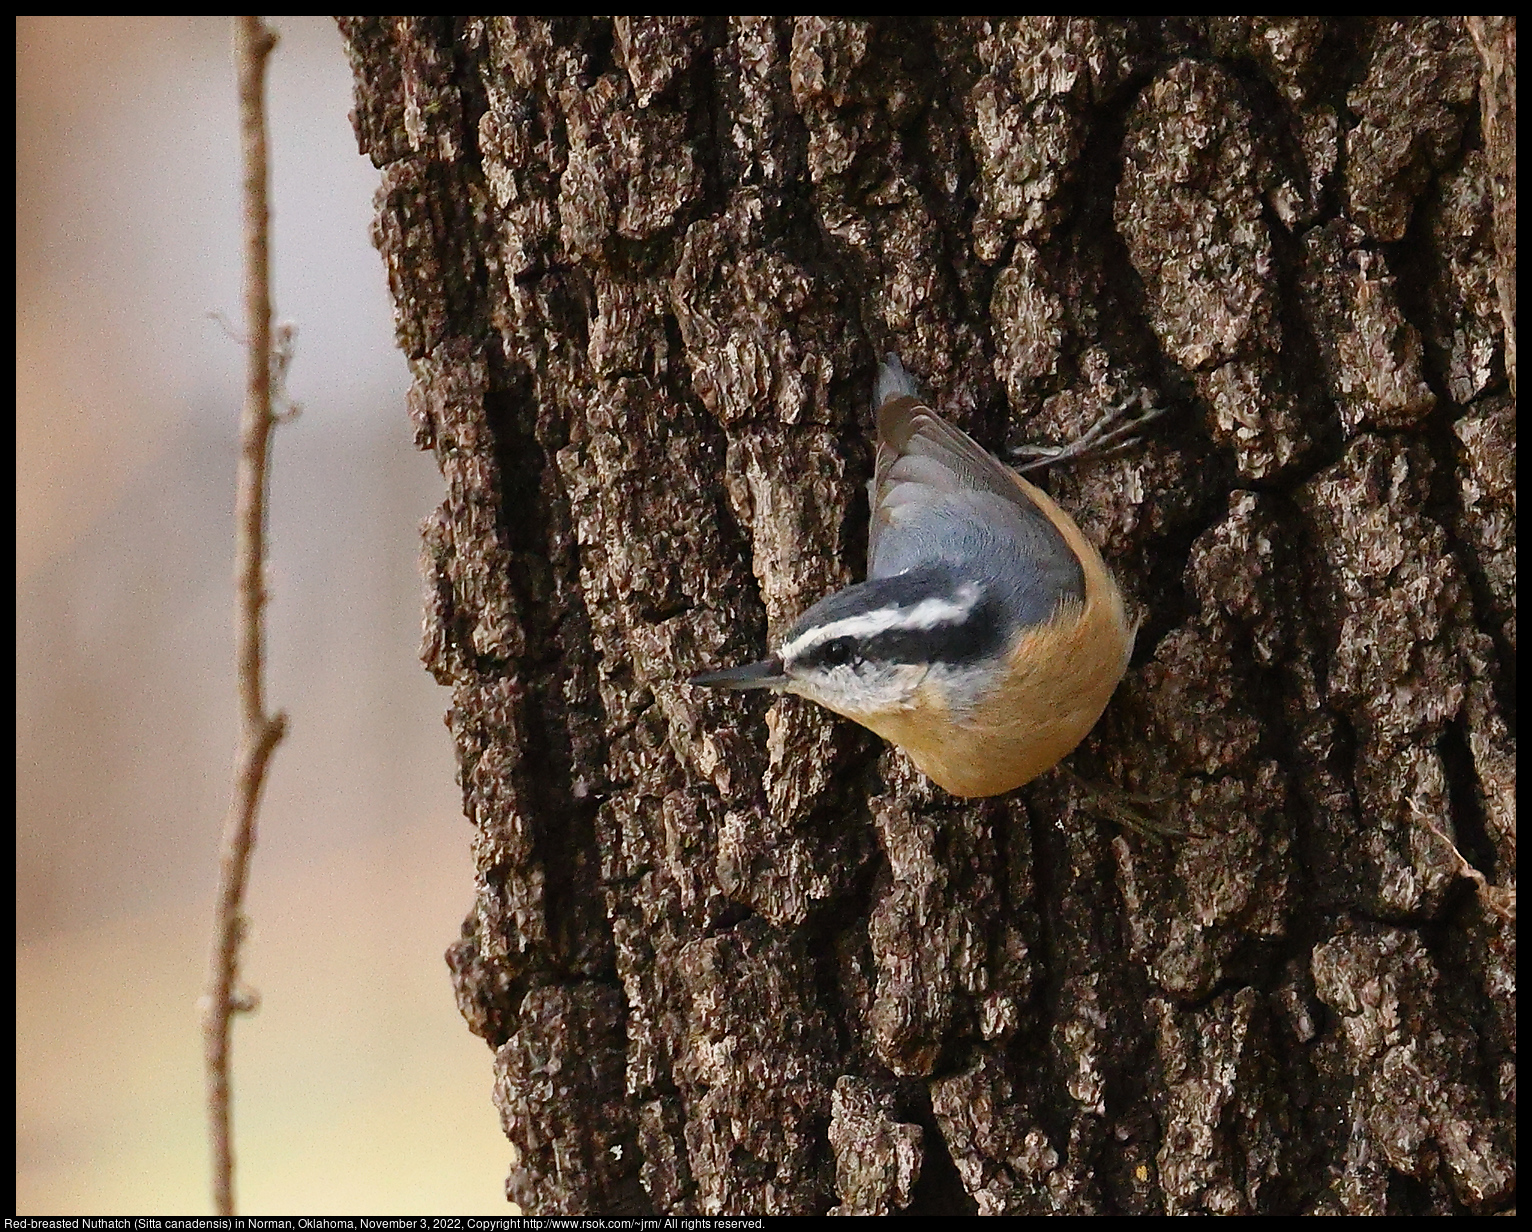 Red-breasted Nuthatch (Sitta canadensis) in Norman, Oklahoma, November 3, 2022